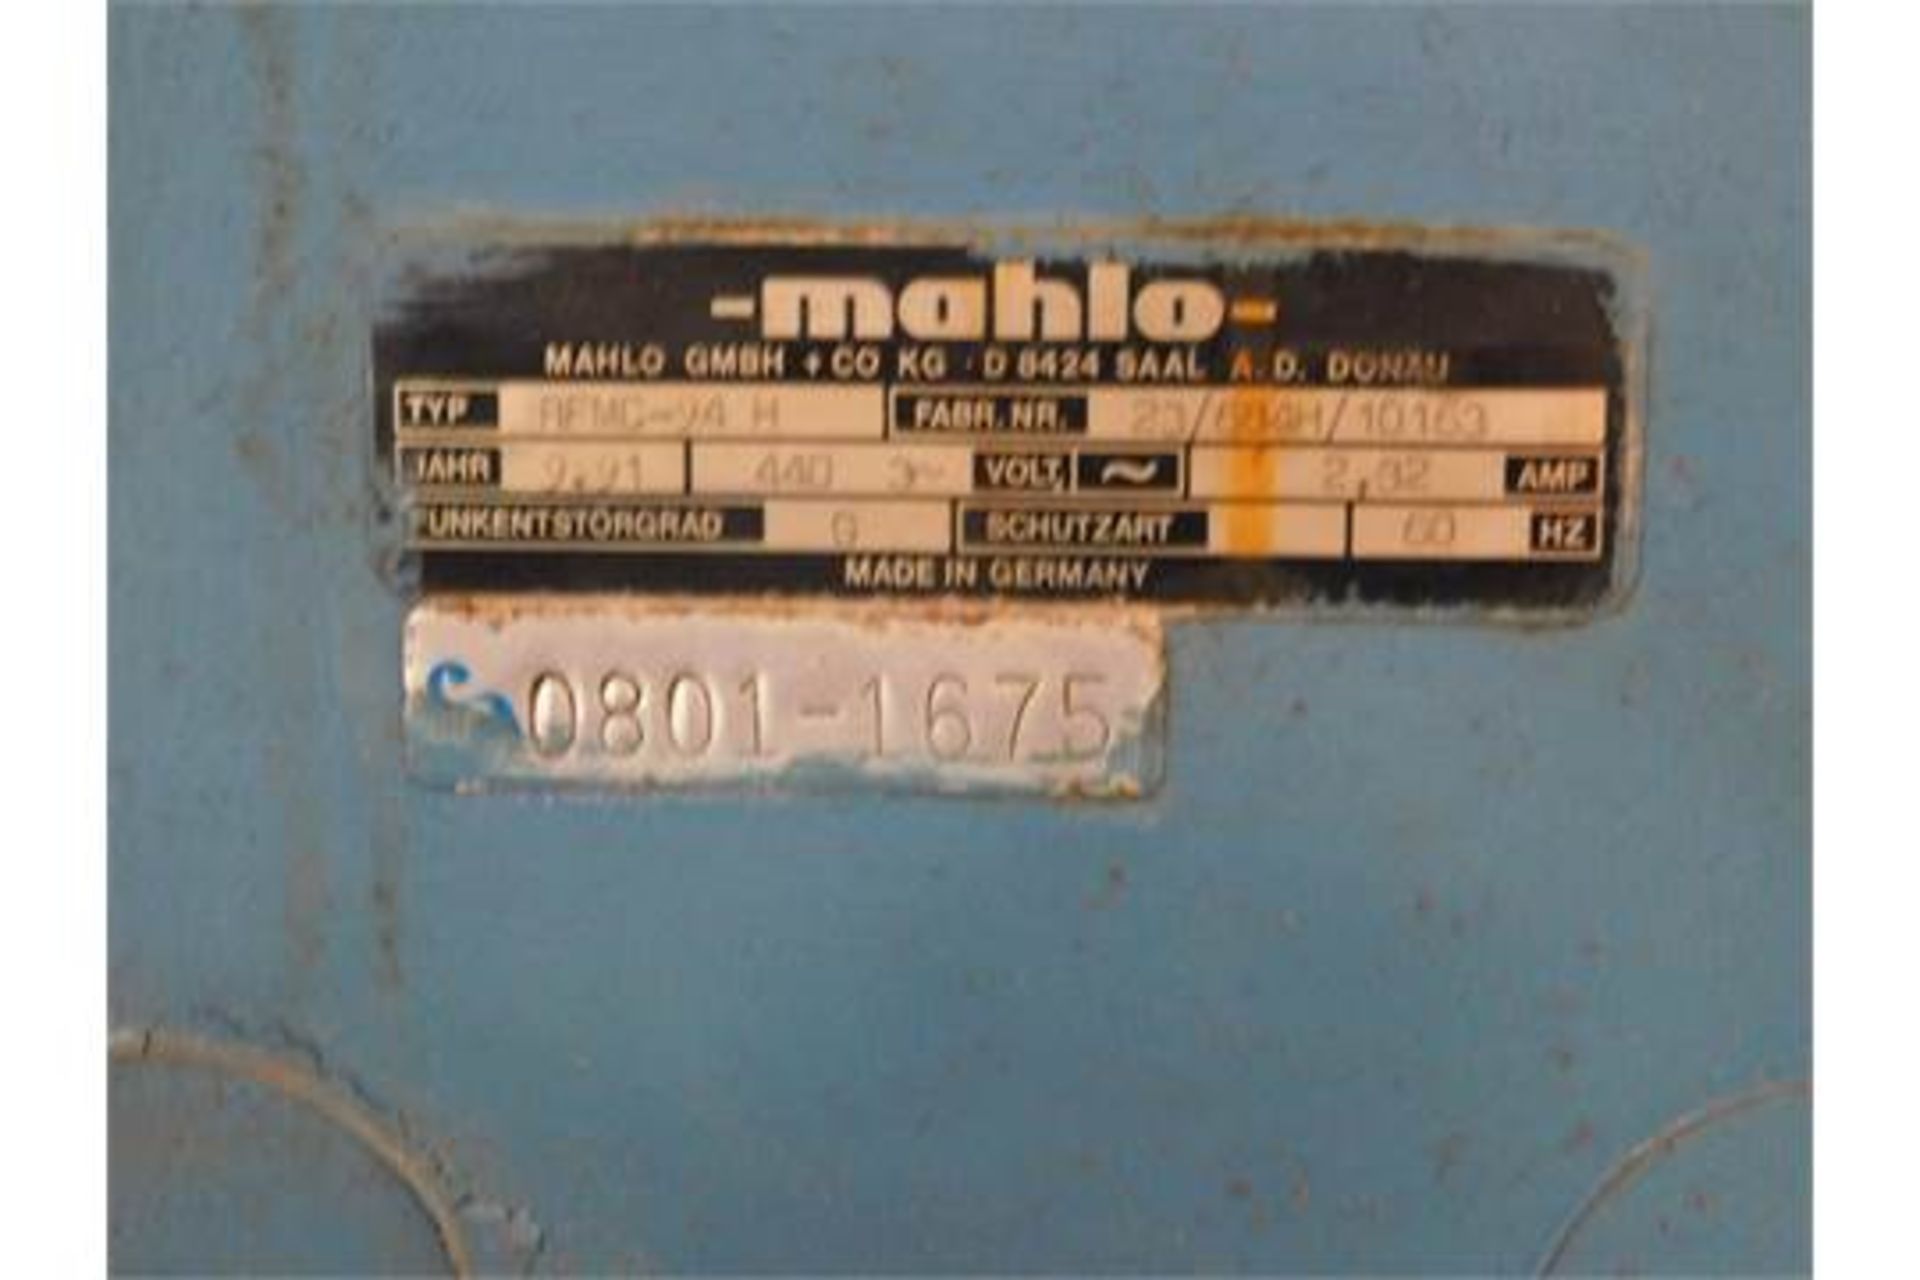 Mahlo System Straitening Machine: Model RFMC 94H, 440/3Volts, Working Length: 78", Rigging Fee $50 - Image 4 of 4